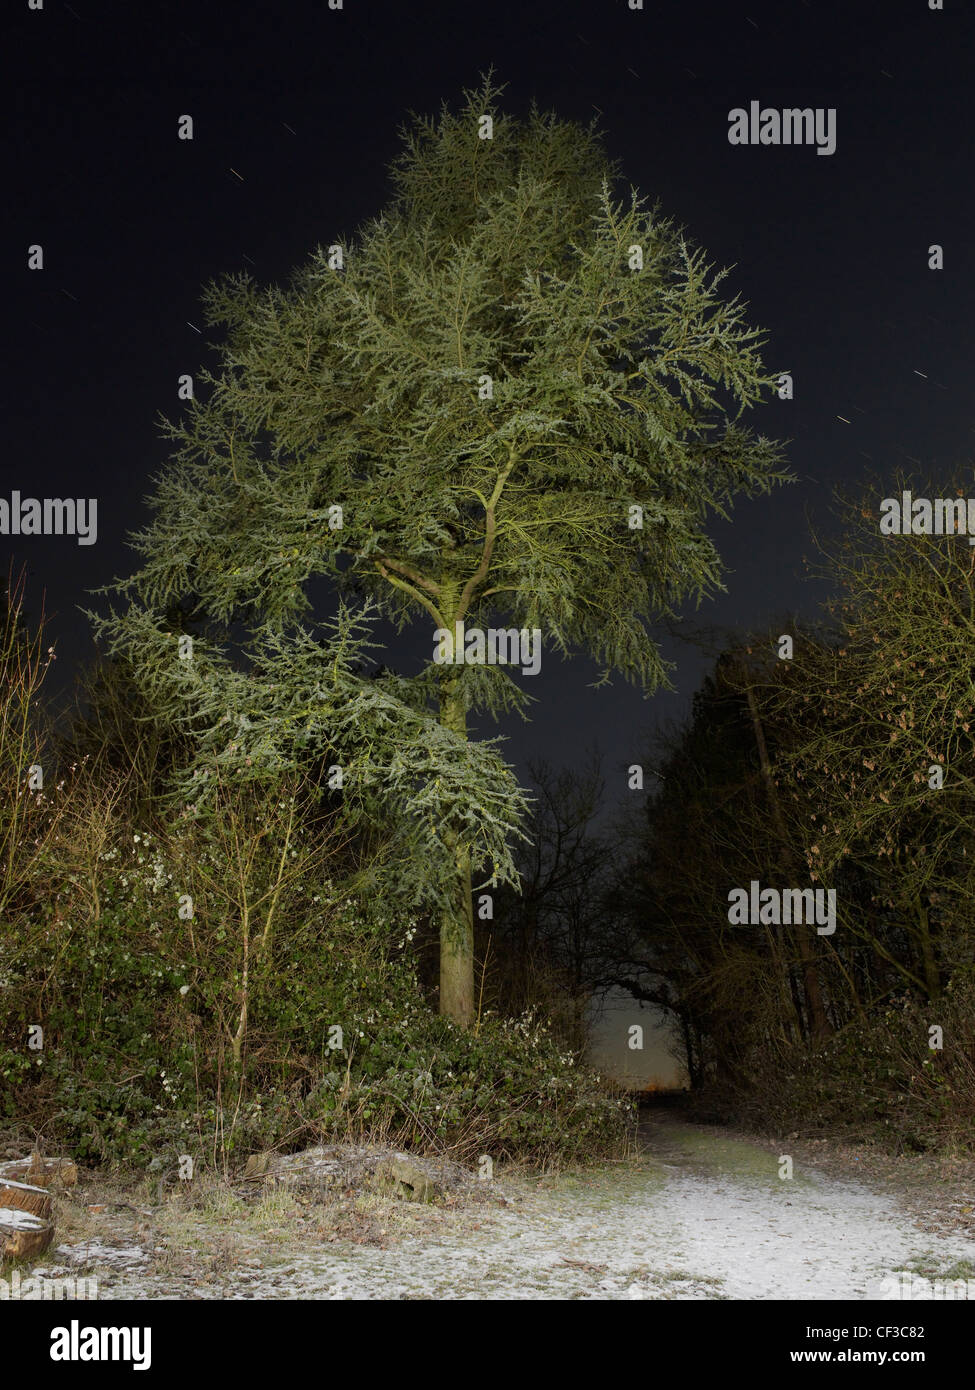 A night time view of a conifer tree in the Sussex countryside. Stock Photo